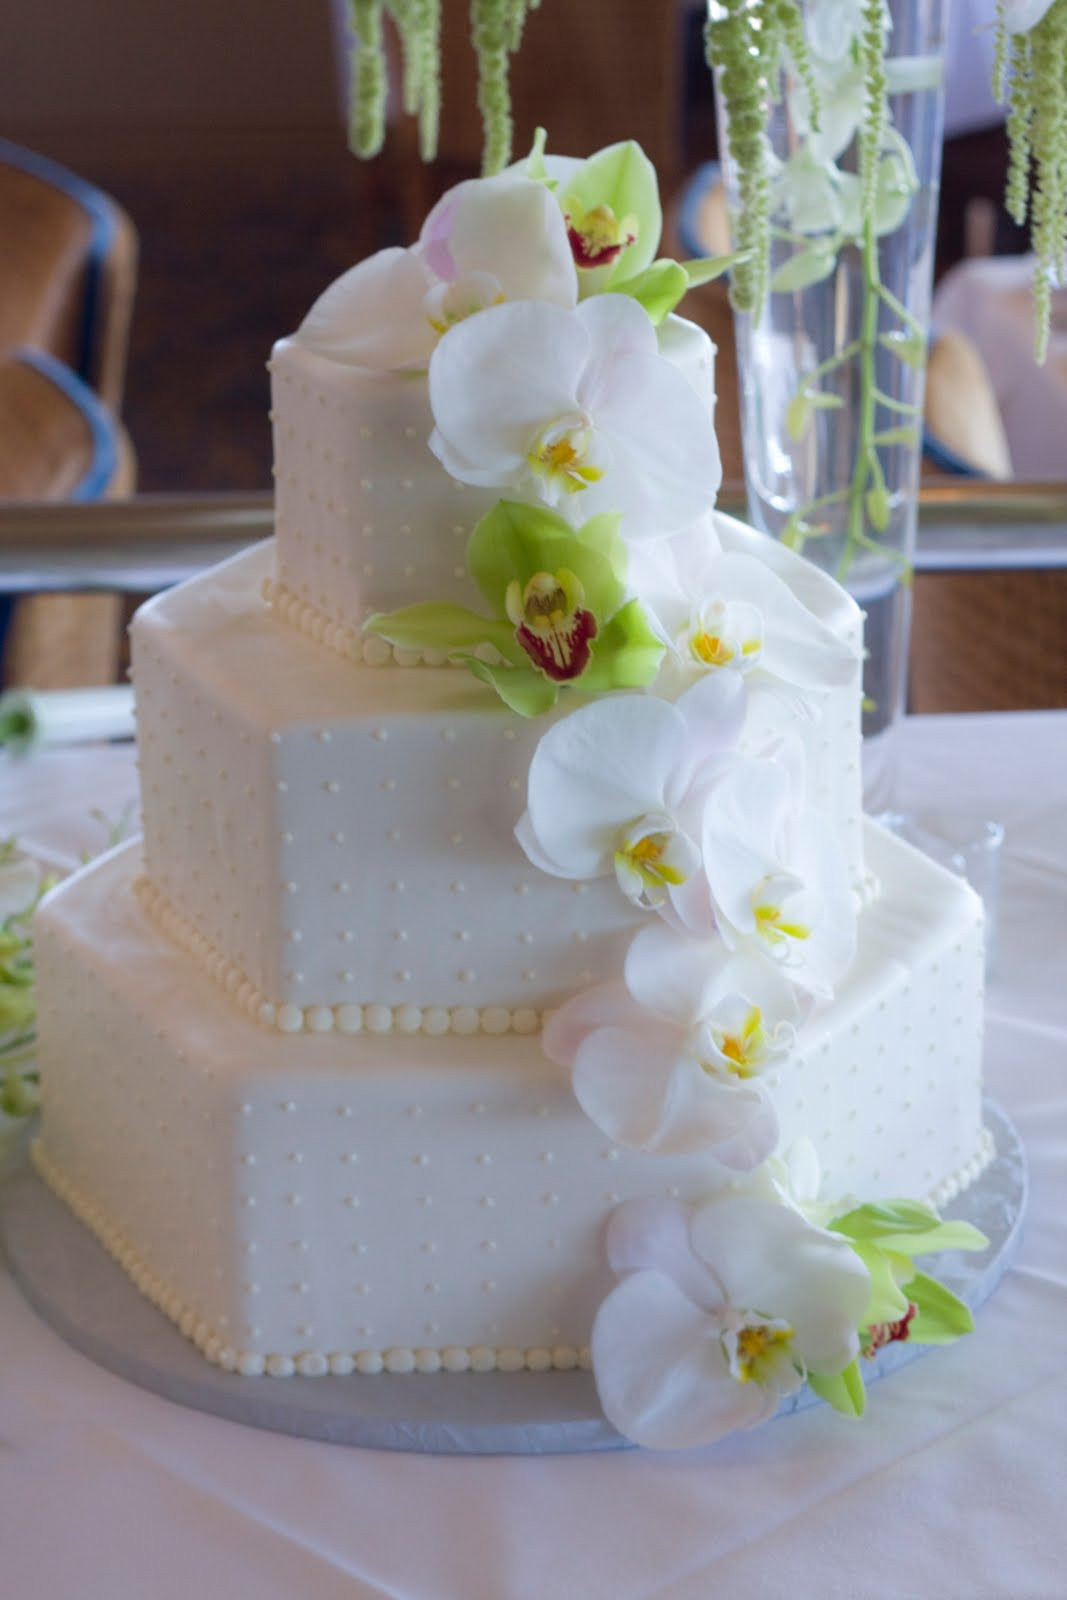 Wedding Cakes With Orchids
 The Crimson Cake Blog White and Green Orchid Wedding Cake